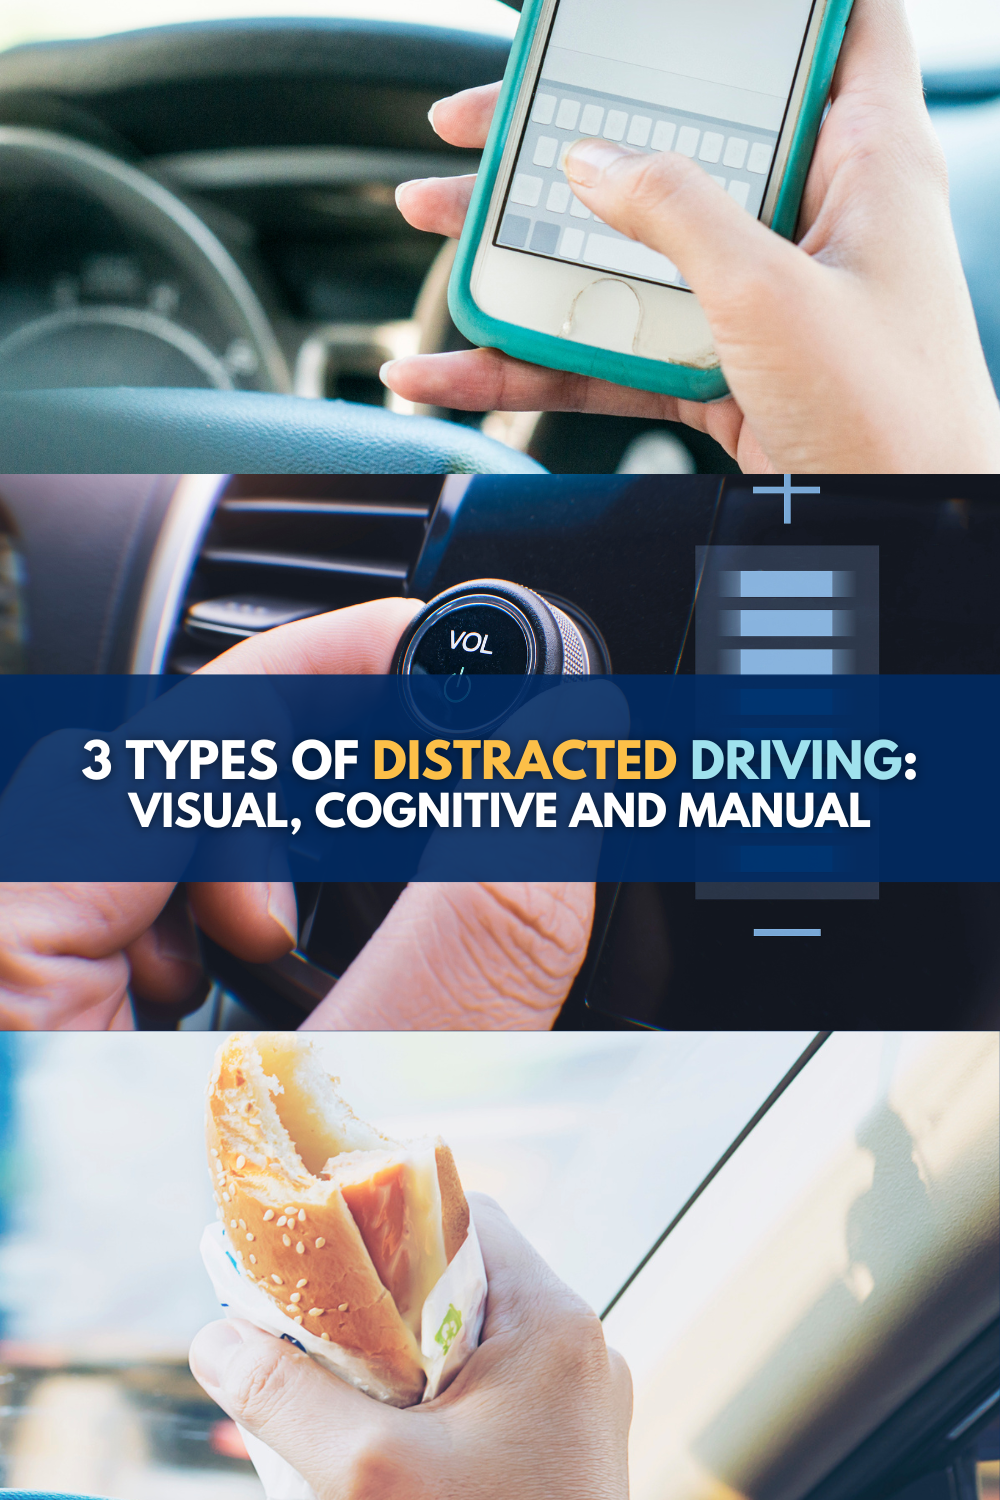 3 types of distracted driving: visual, cognitive and manual